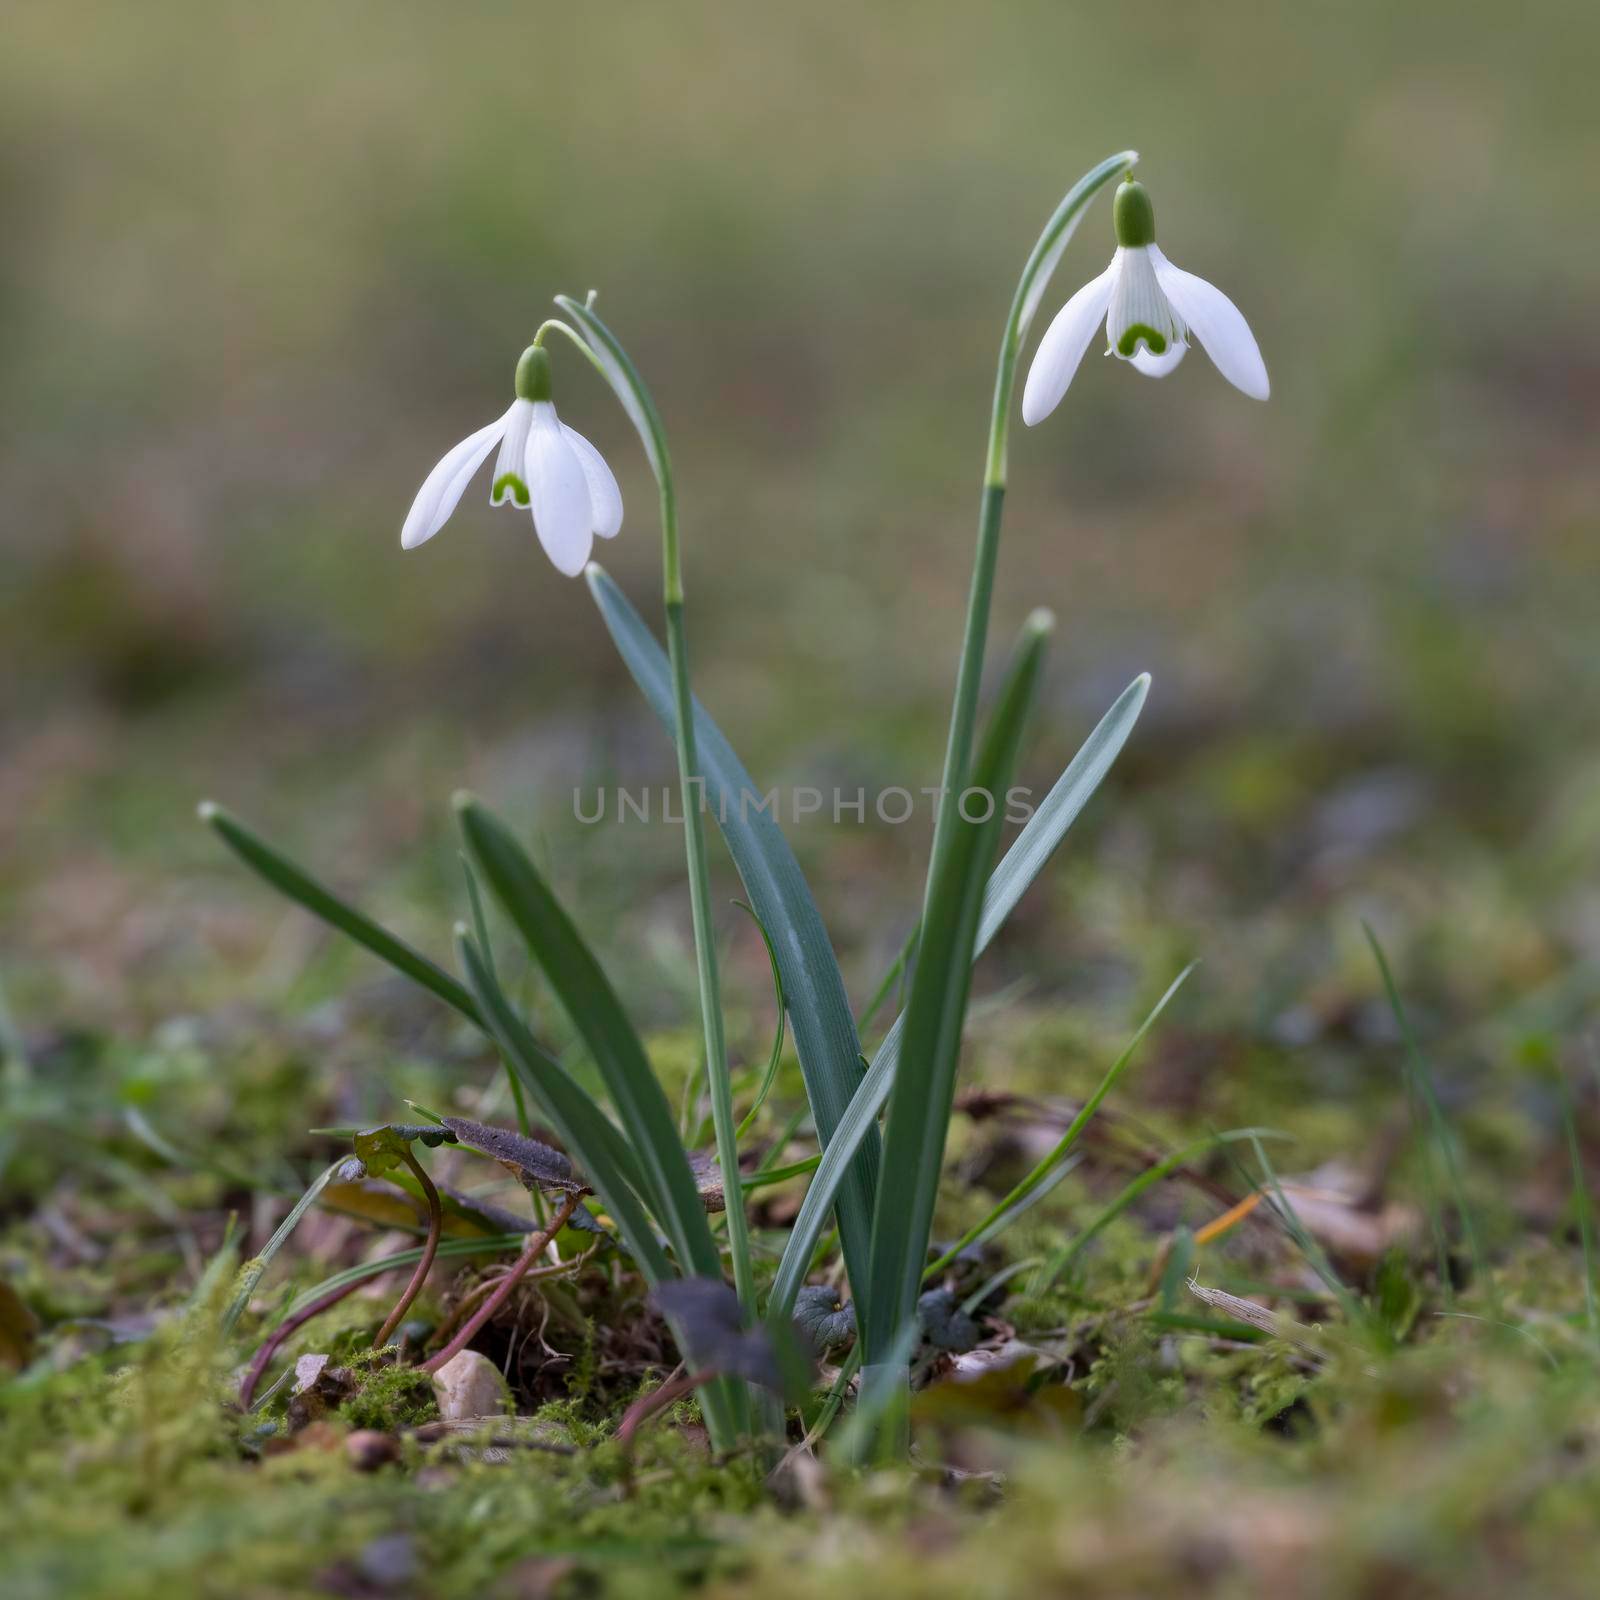 two snowdrops against out of focus background by ahavelaar